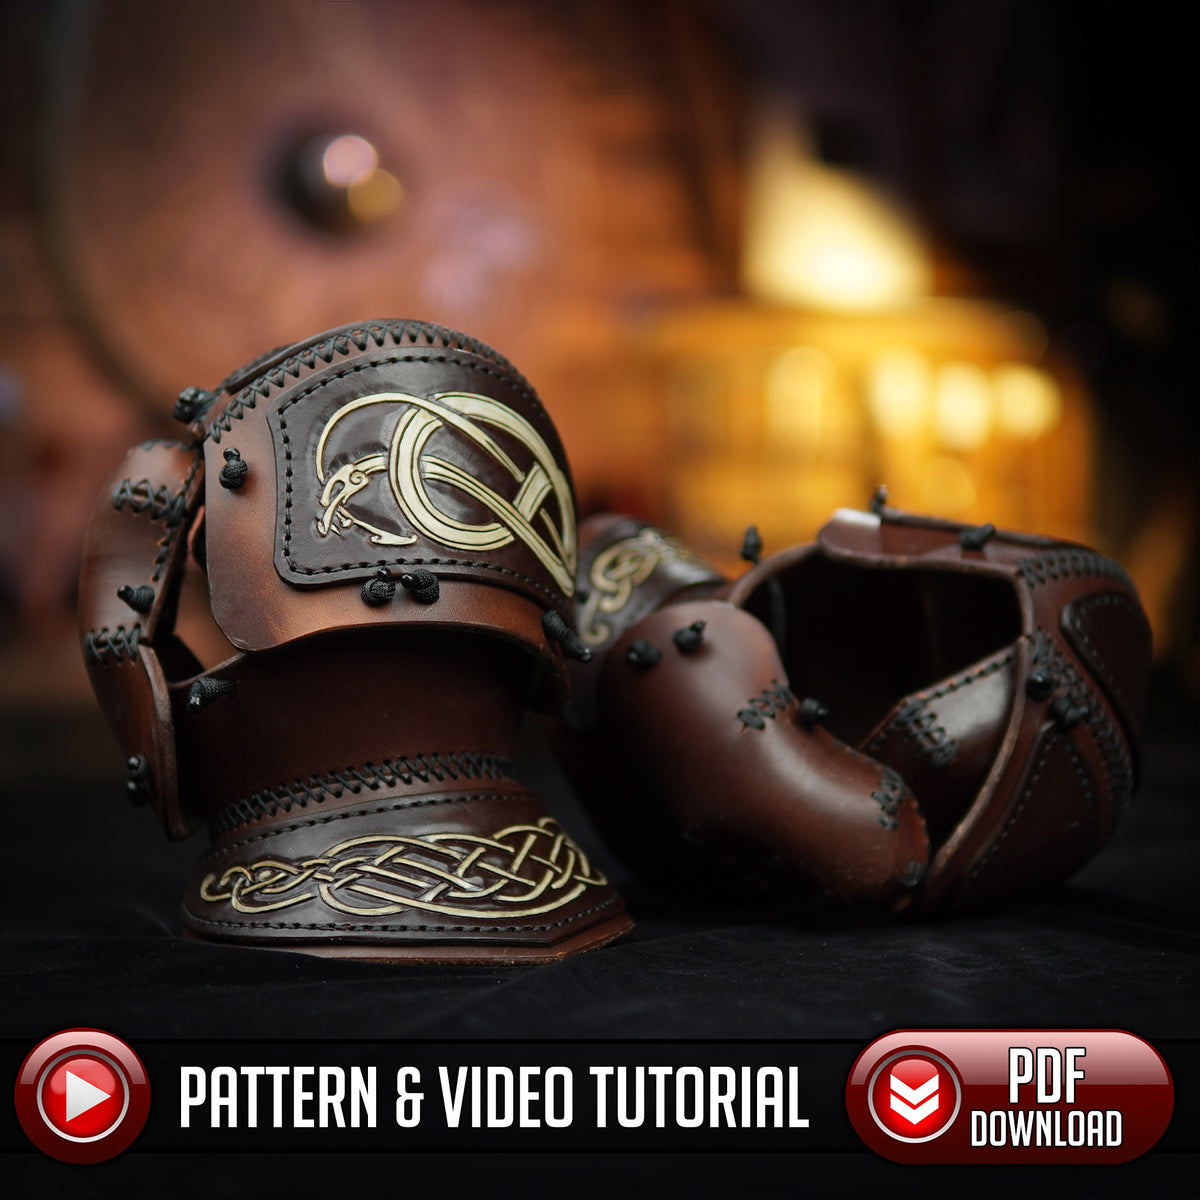 Leather tooling basics tutorial for beginners with Craftools and other  select #leathercraft tools 